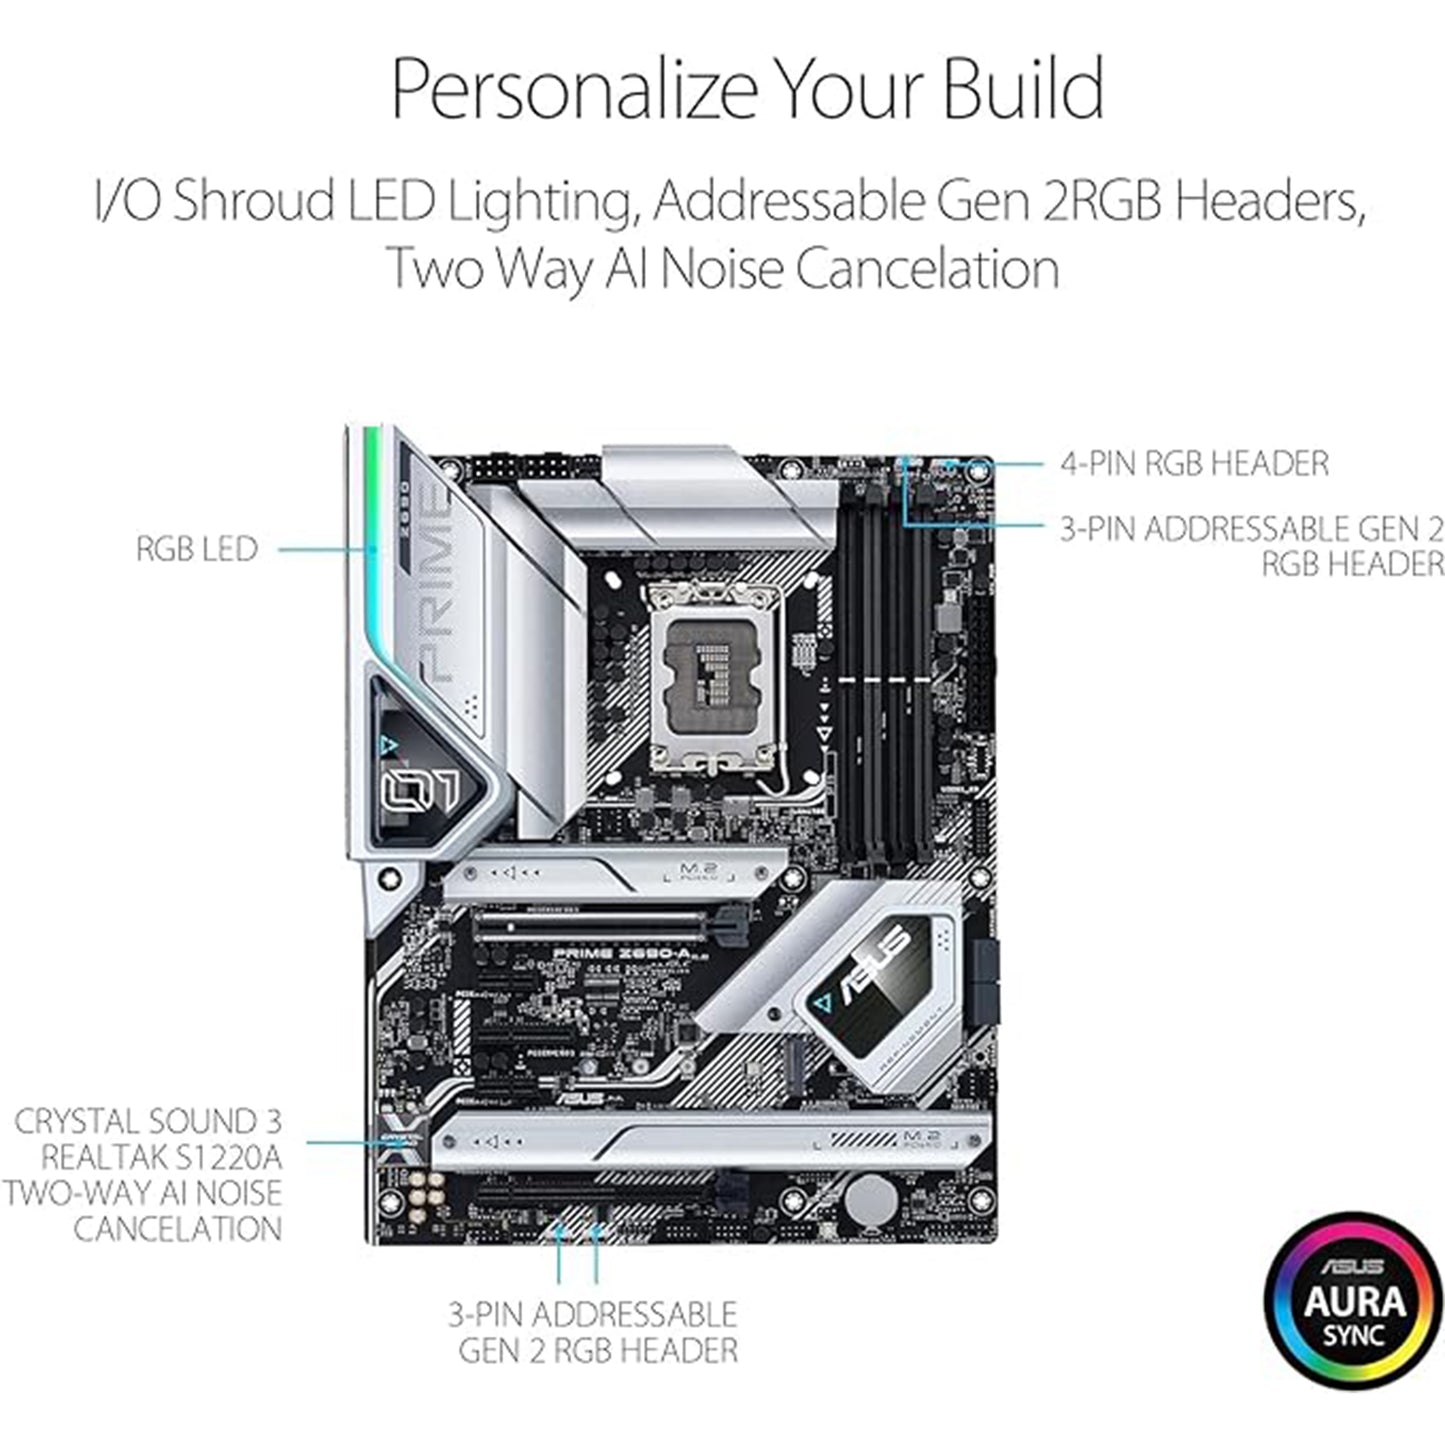 Micro Center Intel Core i9-12900K 16 Cores up to 5.2 GHz Unlocked Desktop Processor with Integrated Intel UHD Graphics 770 Bundle with ASUS Prime Z690-A DDR5 ATX Motherboard